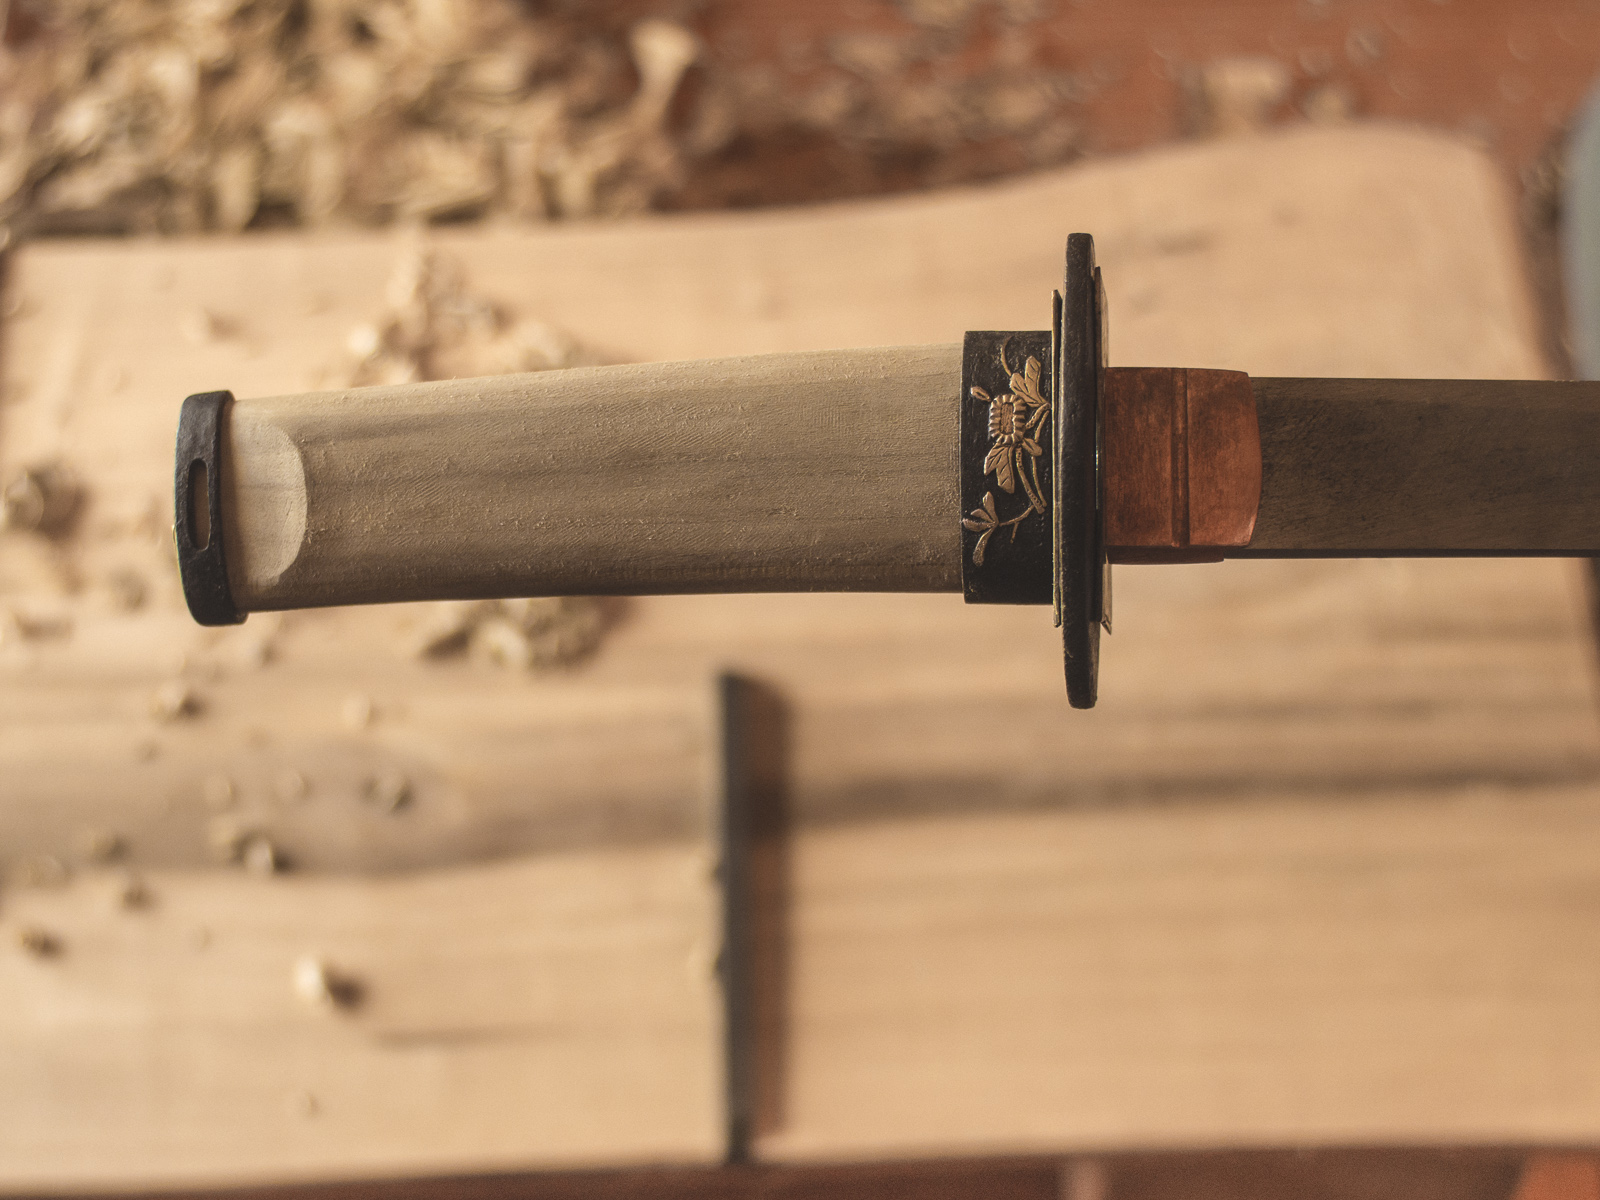 Island Blacksmith: Hand crafted tanto koshirae made from reclaimed and natural materials using traditional techniques